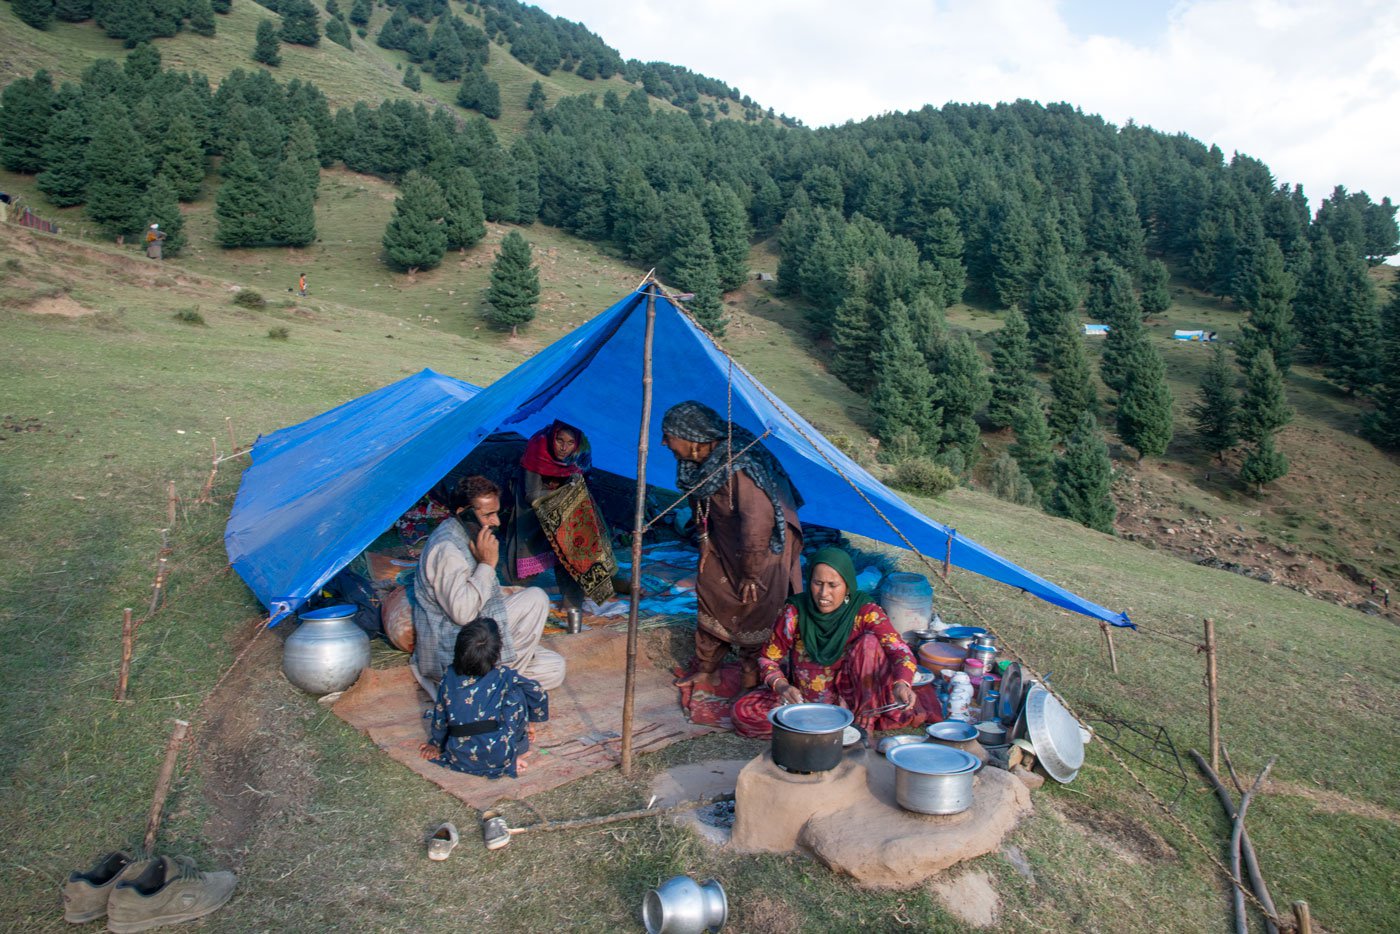 At Bakarwal camps, a sharing of tea, land and life: women from the nearby villages who come to graze their cattle also join in